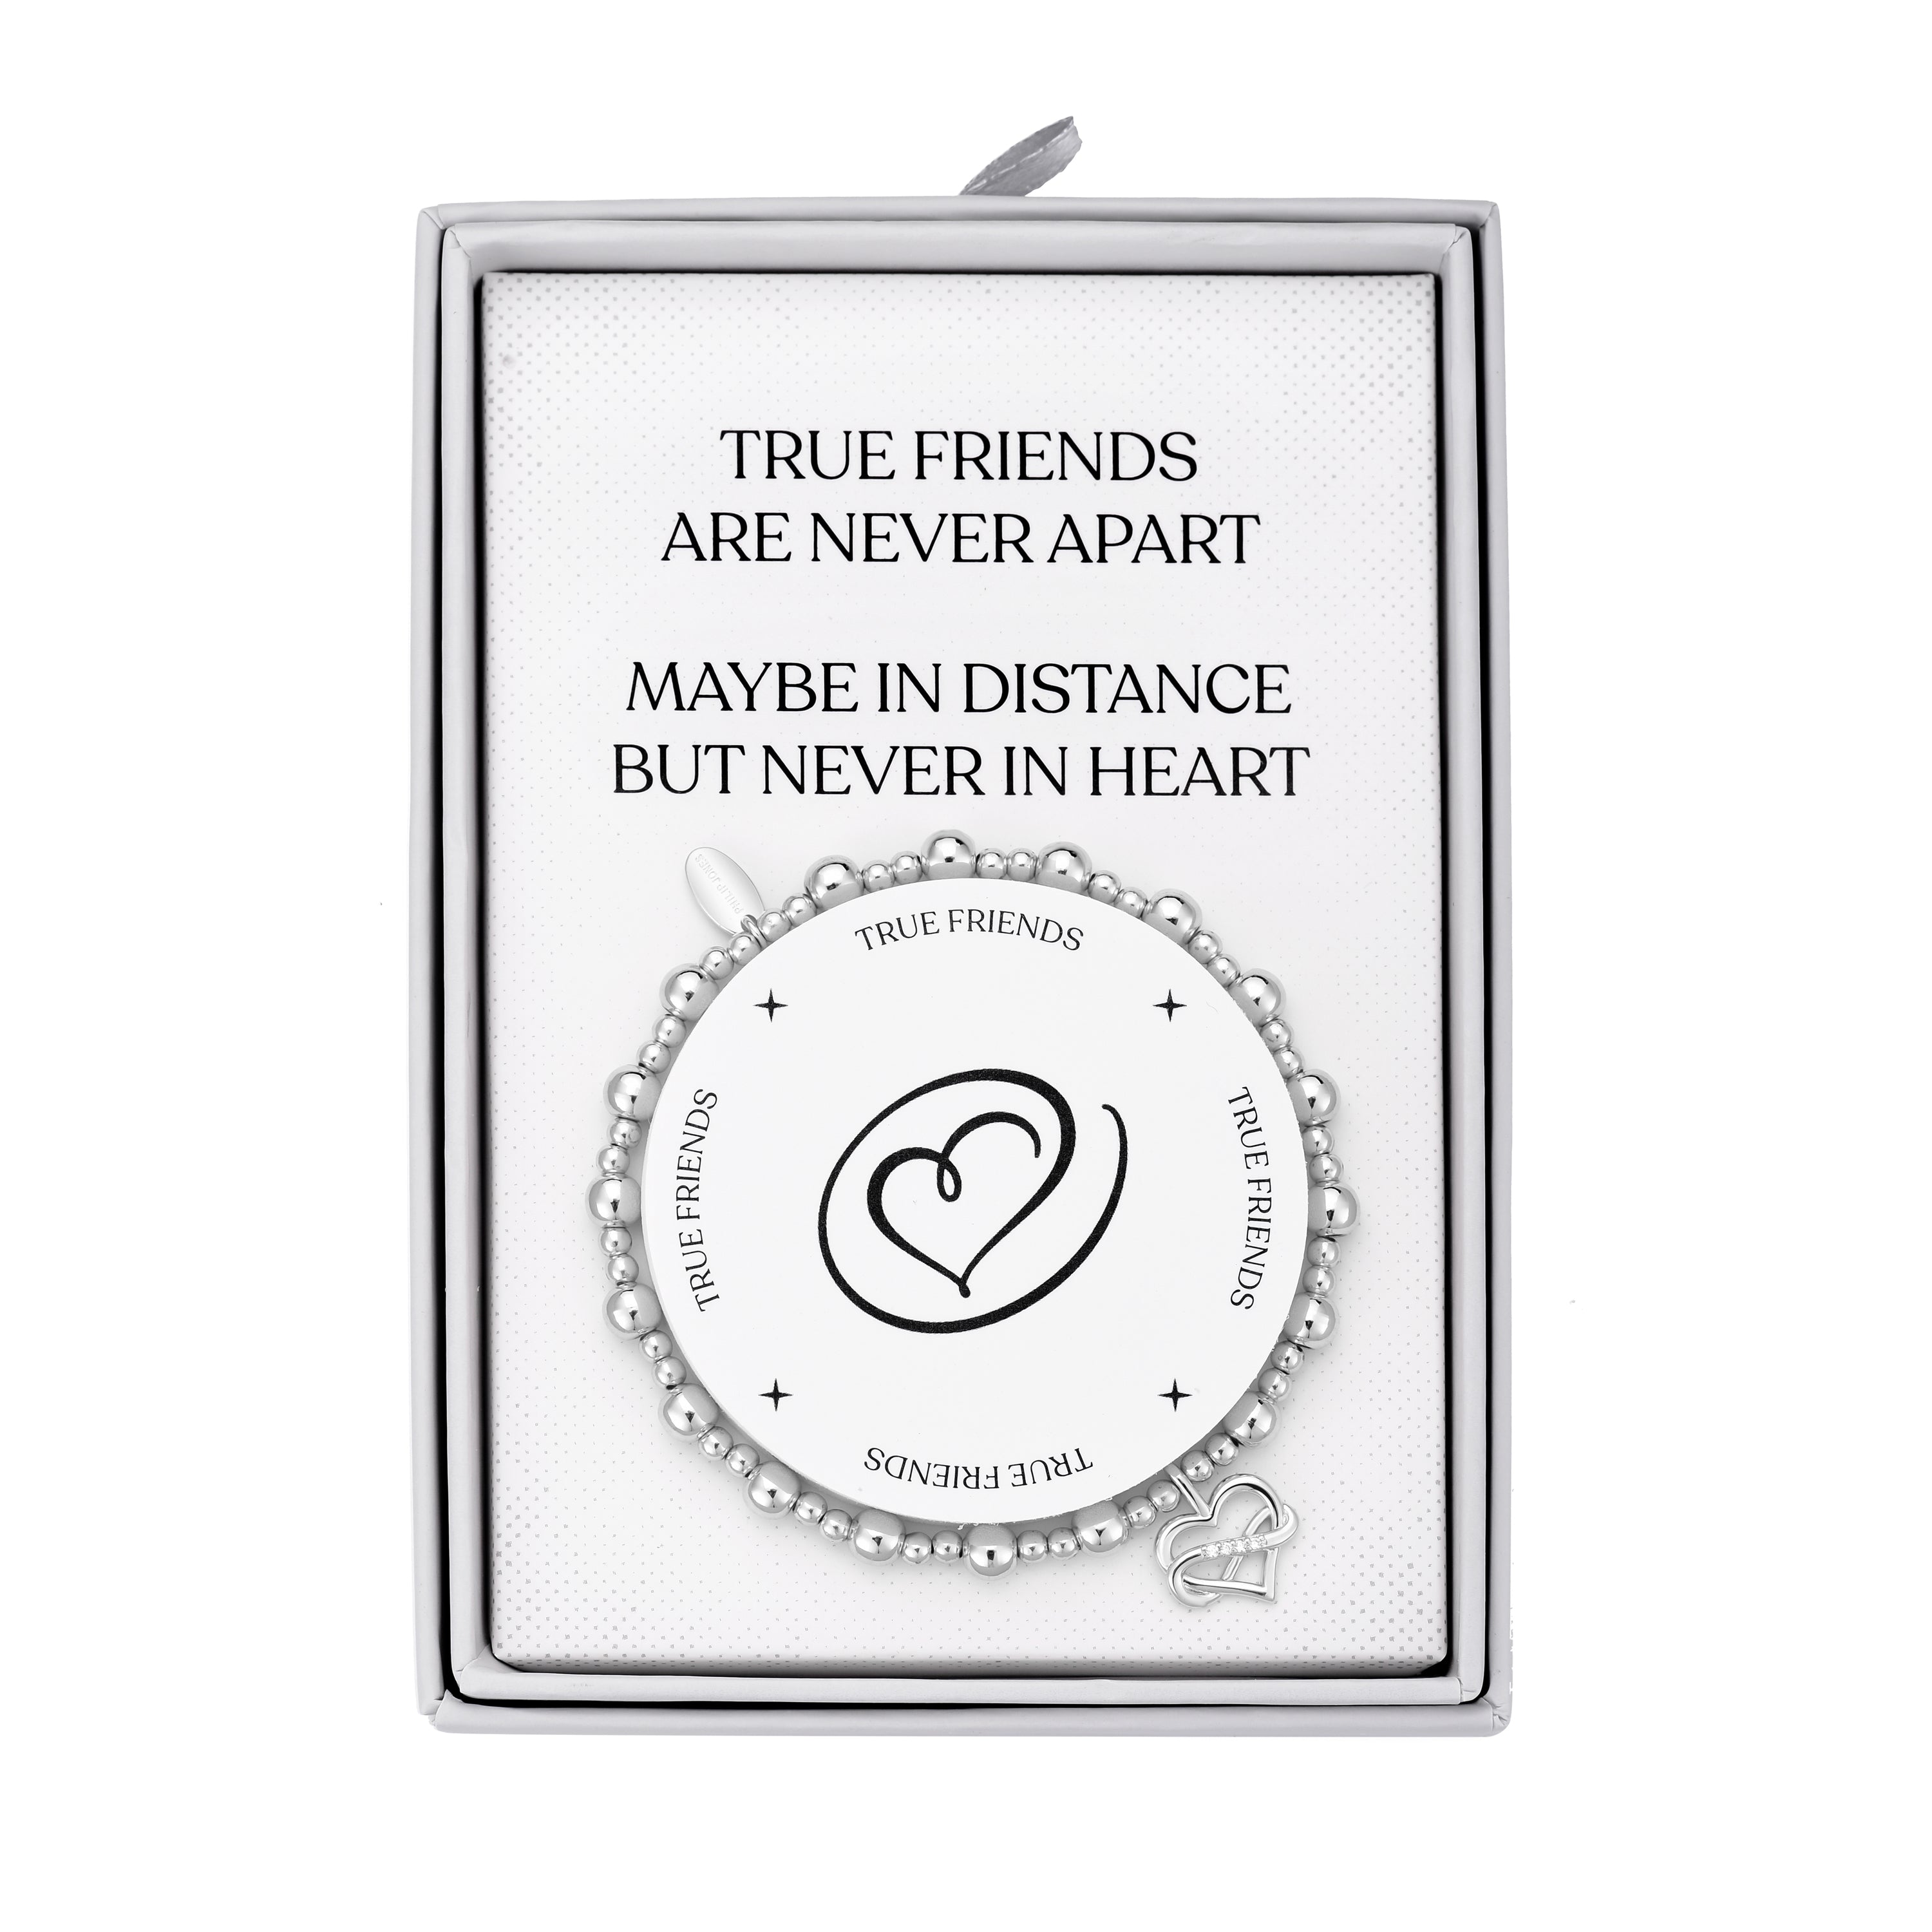 Silver Plated True Friends Quote Stretch Bracelet with Gift Box by Philip Jones Jewellery